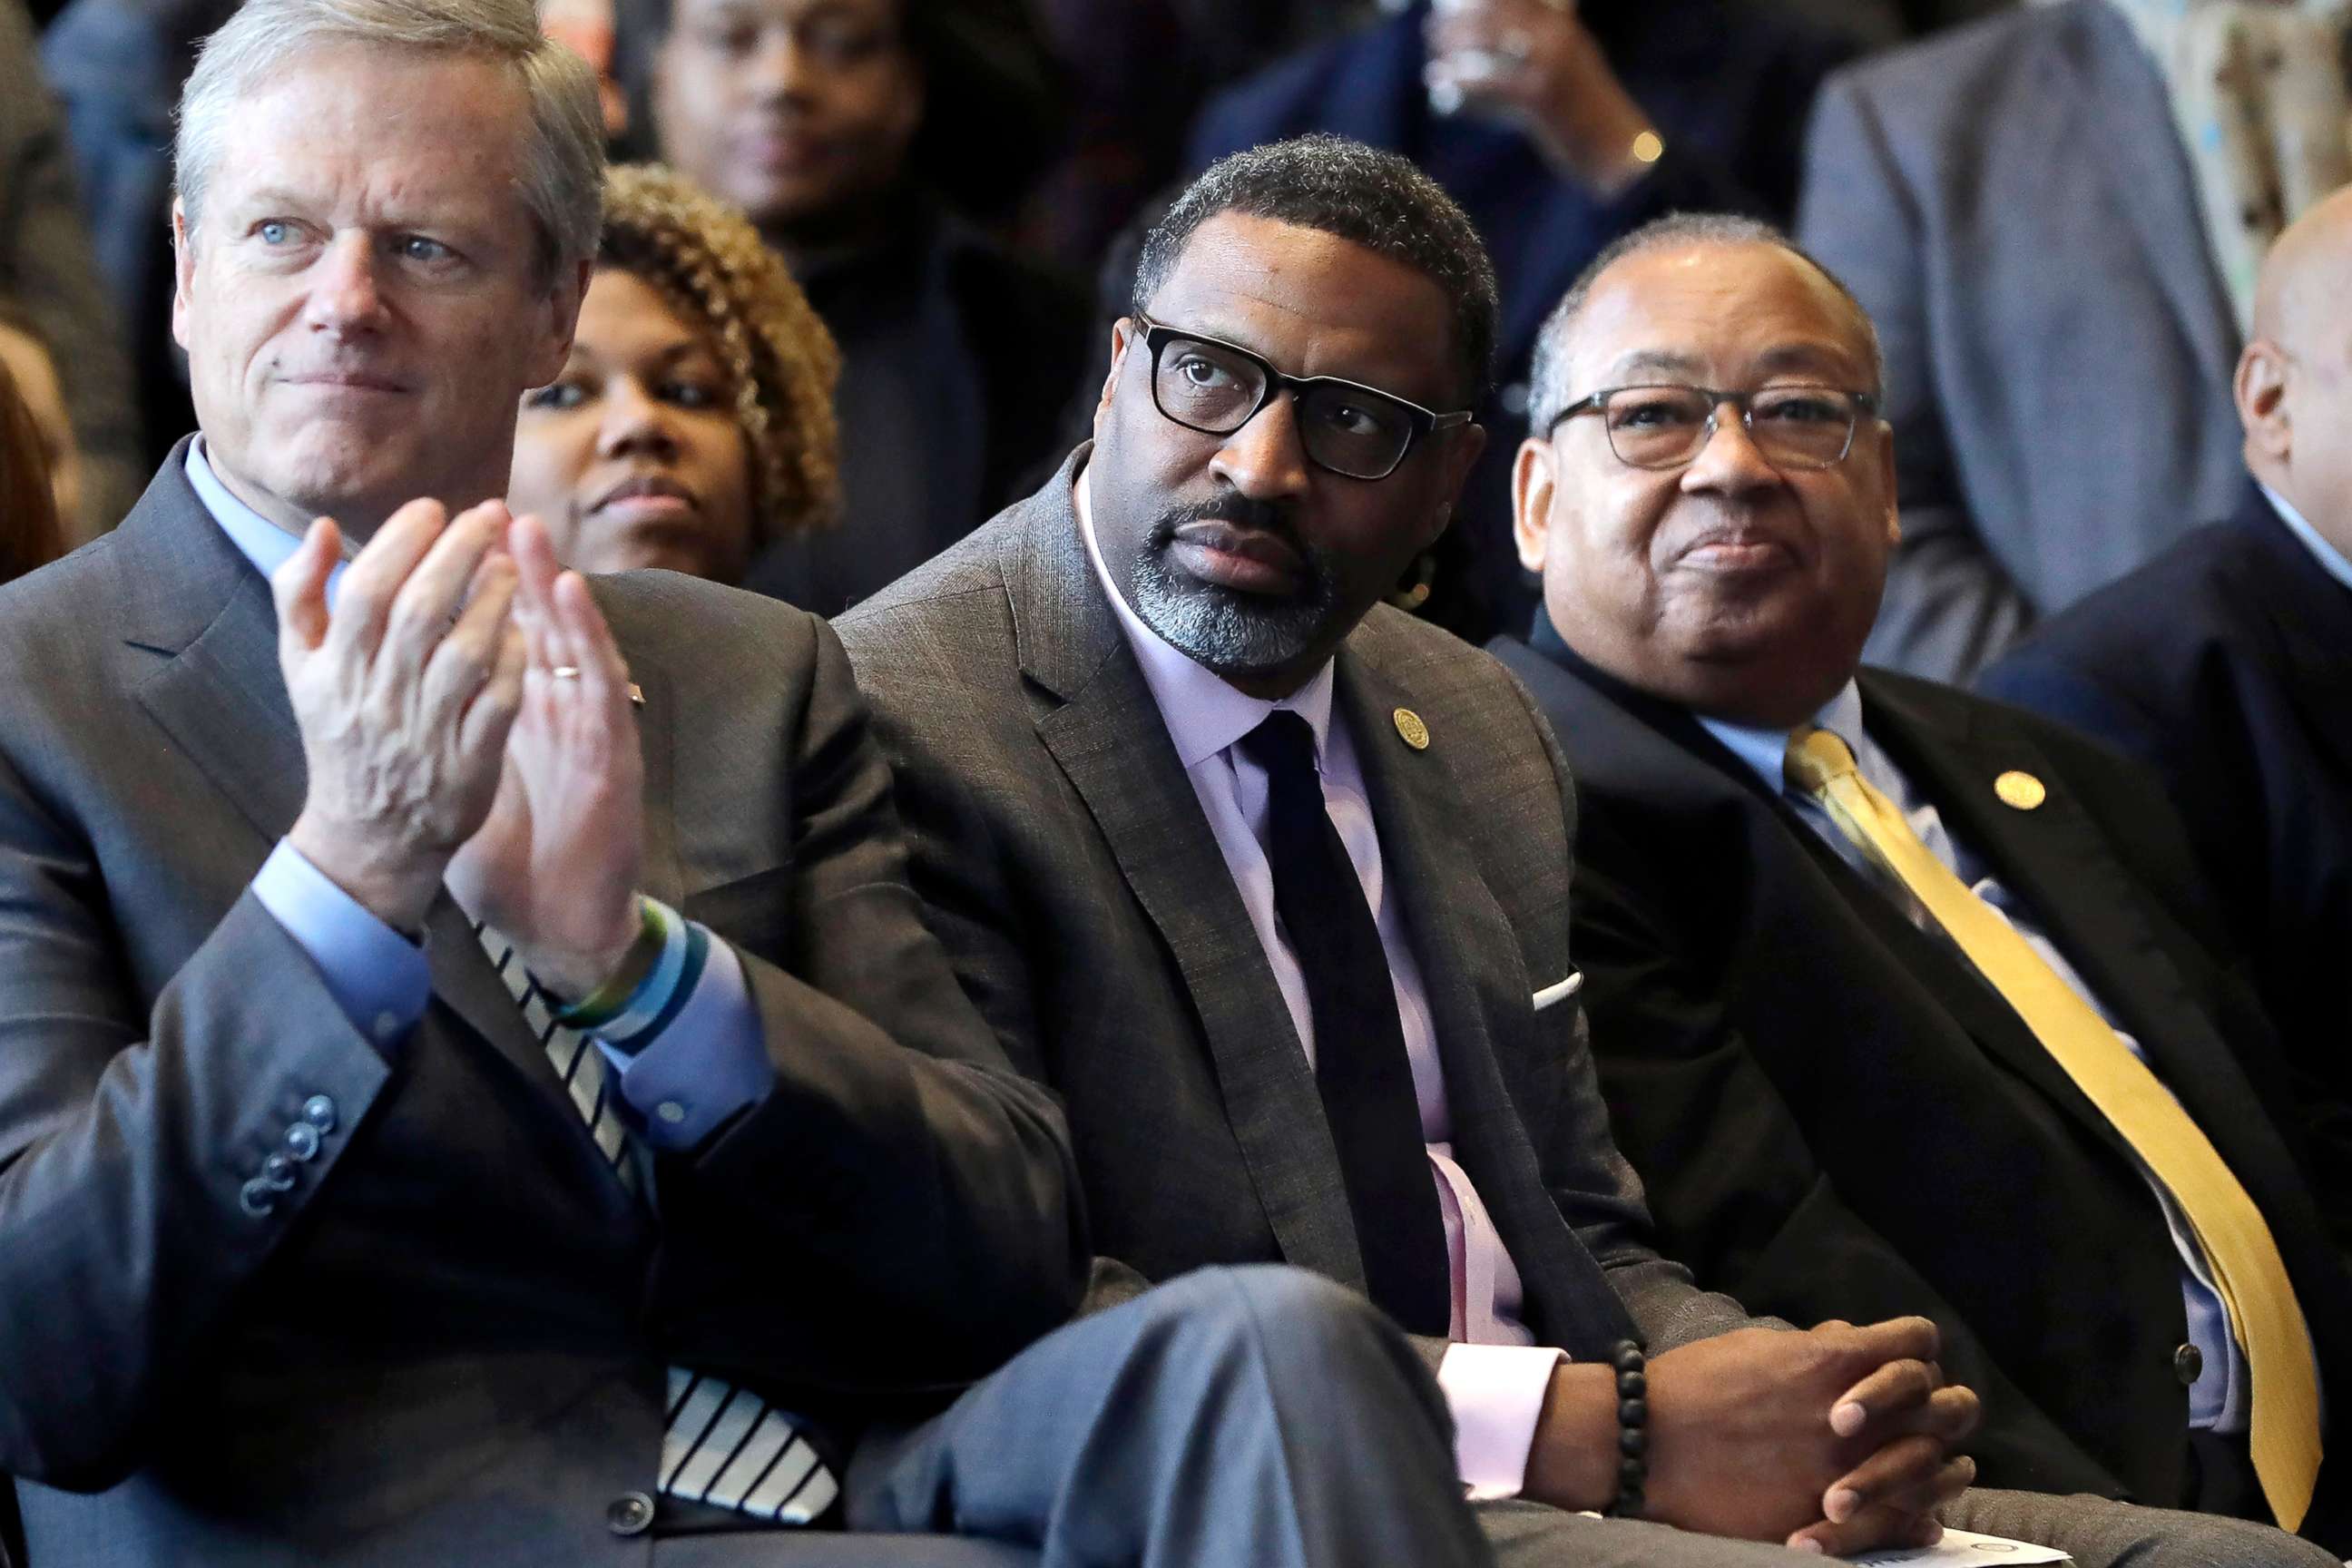 PHOTO: National Association for the Advancement of Colored People President Derrick Johnson, center, Massachusetts Gov. Charlie Baker, left, and NAACP Chairman Leon W. Russell, right, look on during a news conference on Dec. 12, 2019, in Boston.